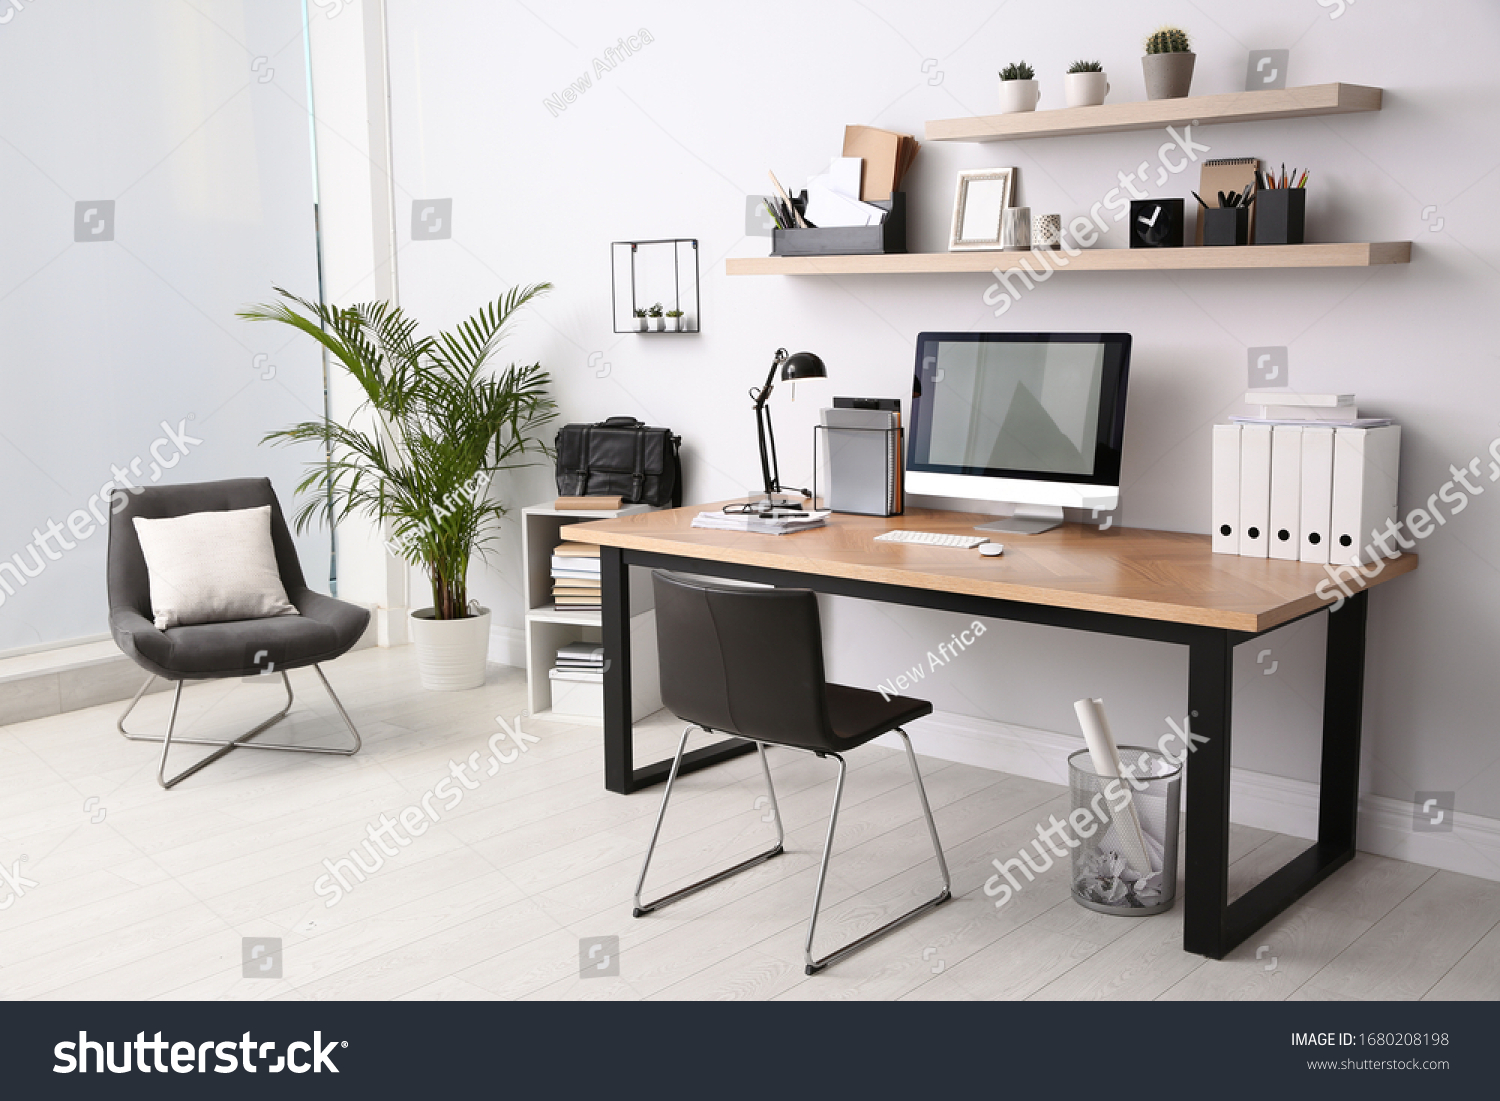 Modern computer on table in office interior. Stylish workplace #1680208198